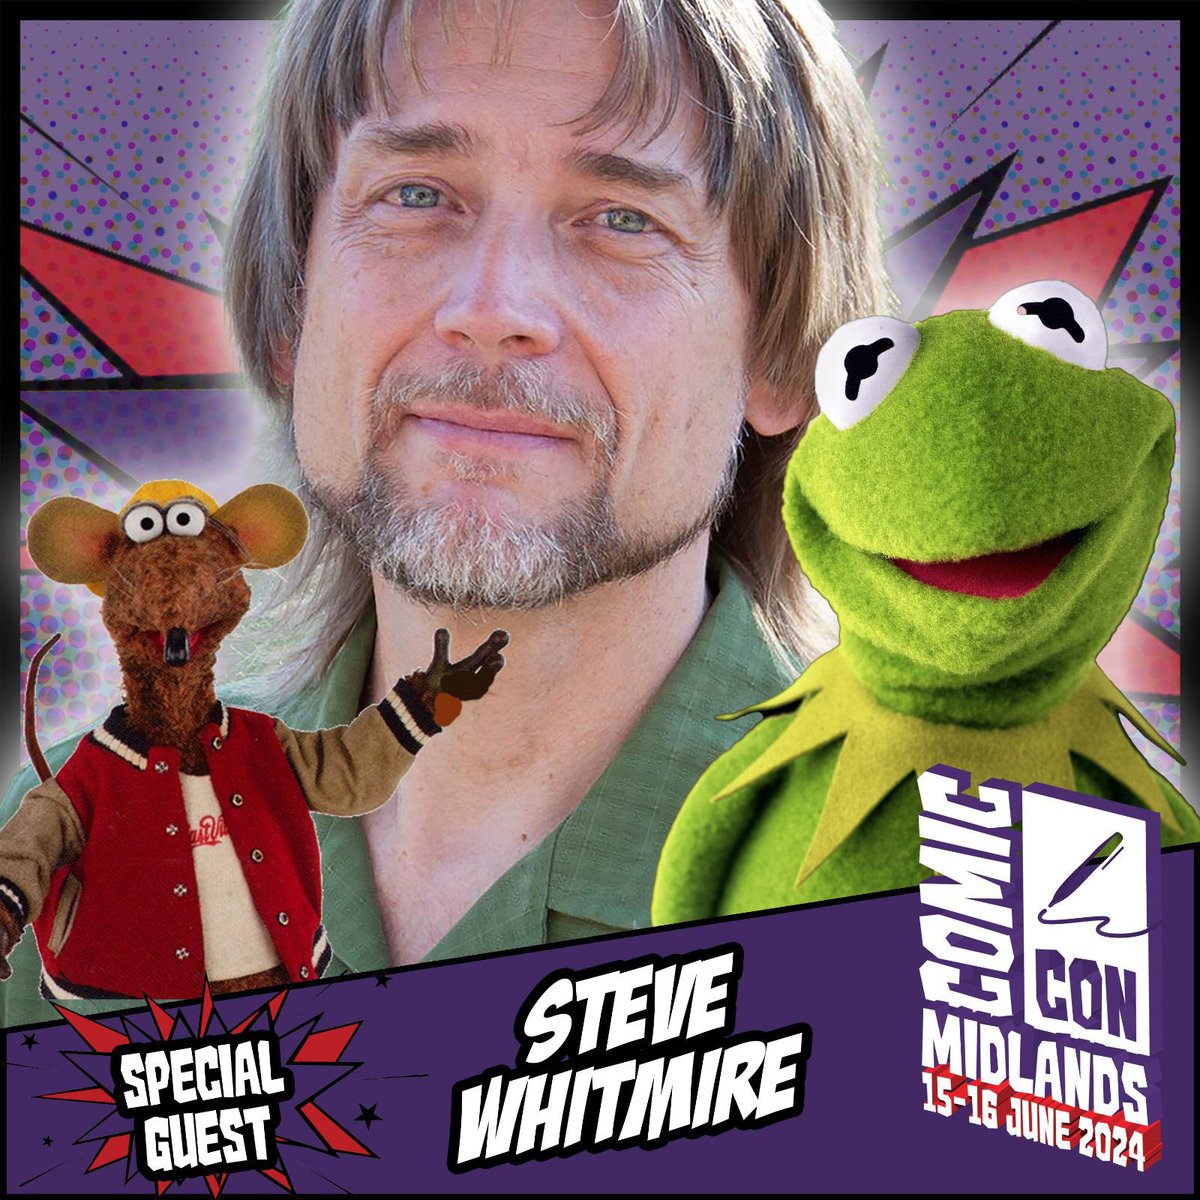 Comic Con Midlands welcomes Steve Whitmire, known for projects such as The Muppets, Sesame Street, Fraggle Rock, and many more. Appearing 15-16 June! Tickets: comicconventionmidlands.co.uk